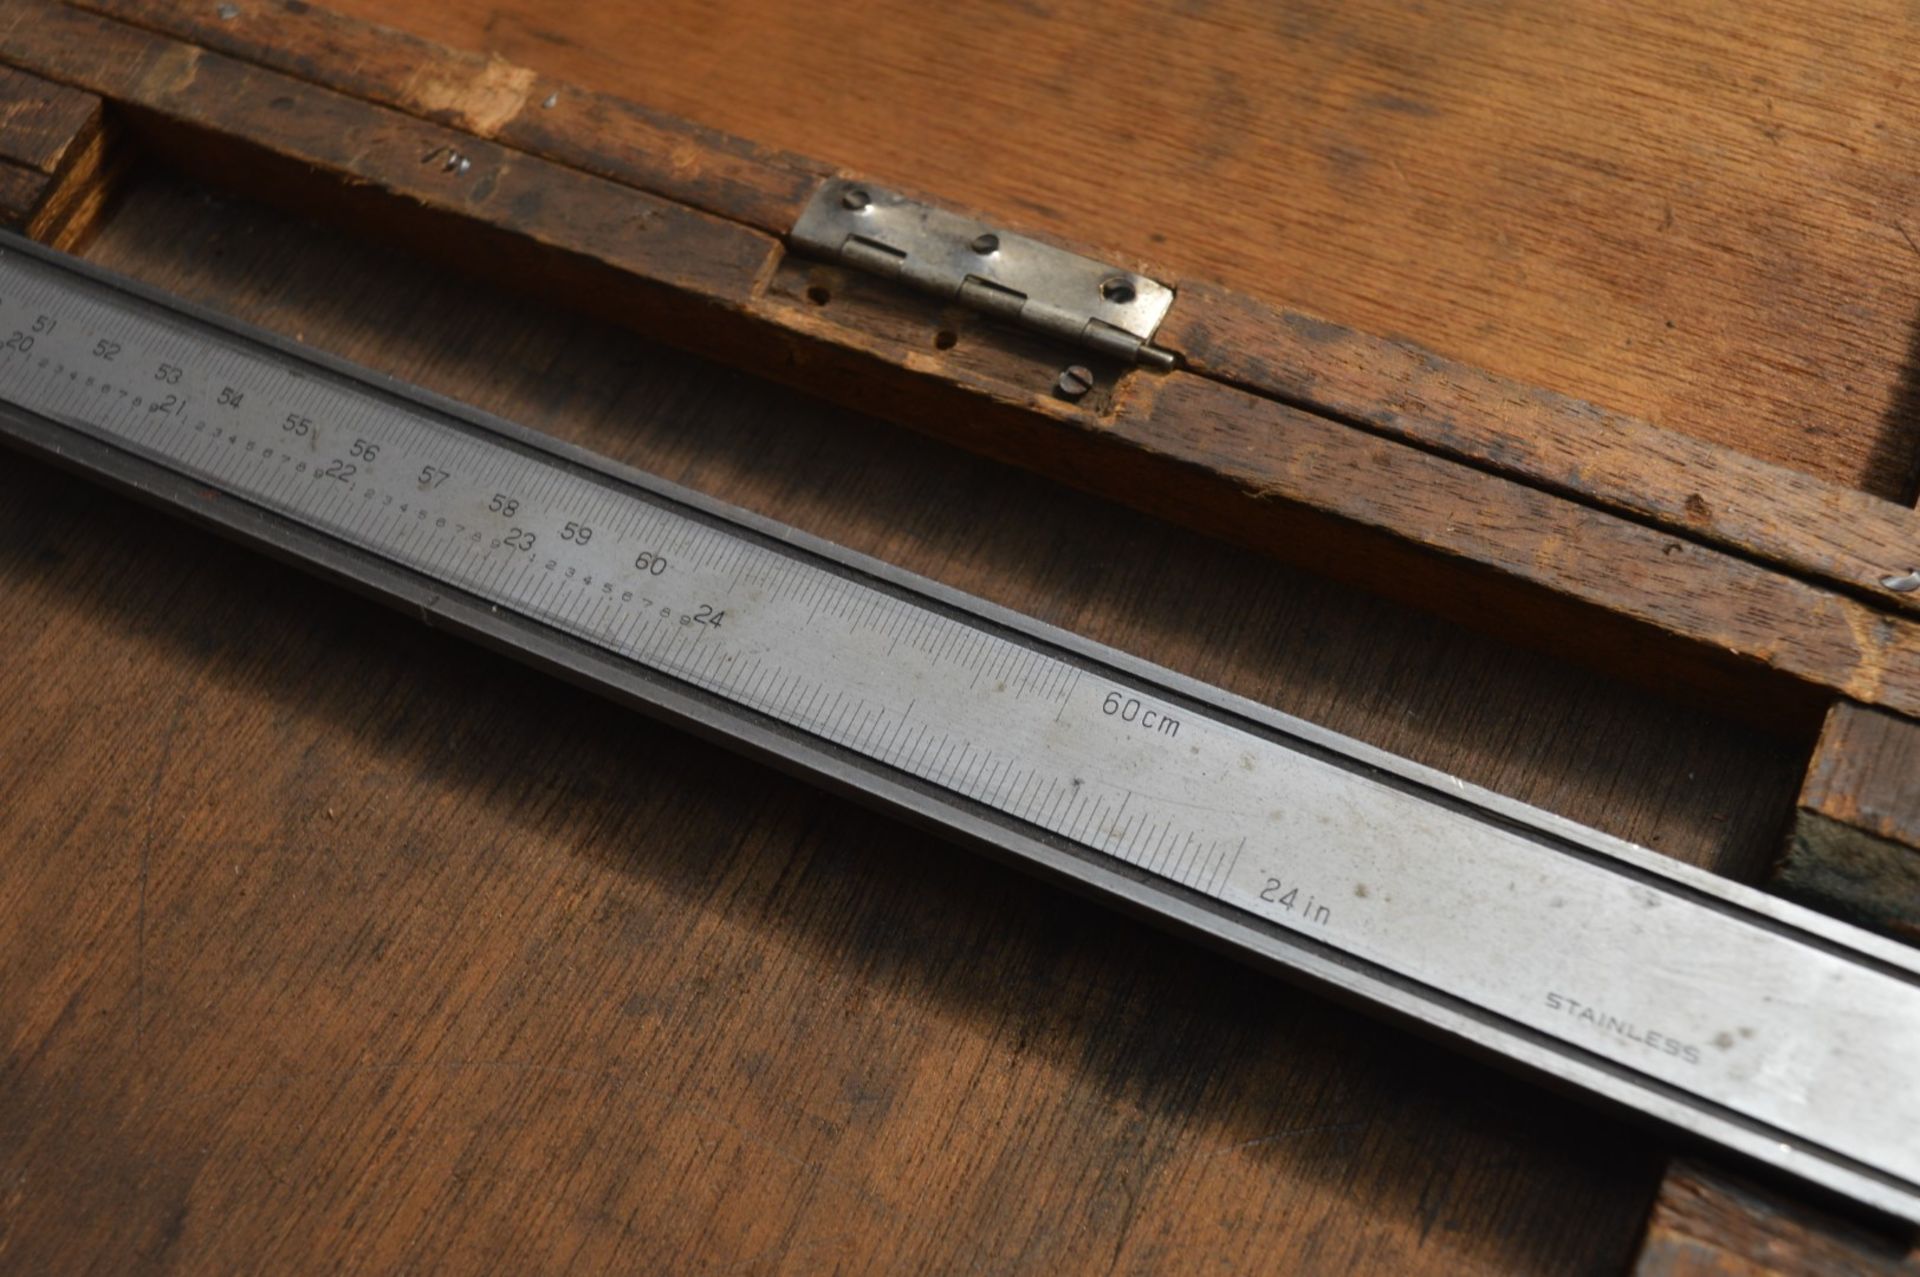 1 x Kanon Caliper Measuring Tool With Case - Length 78cm - CL011 - Ref IT502 - Location: - Image 3 of 5